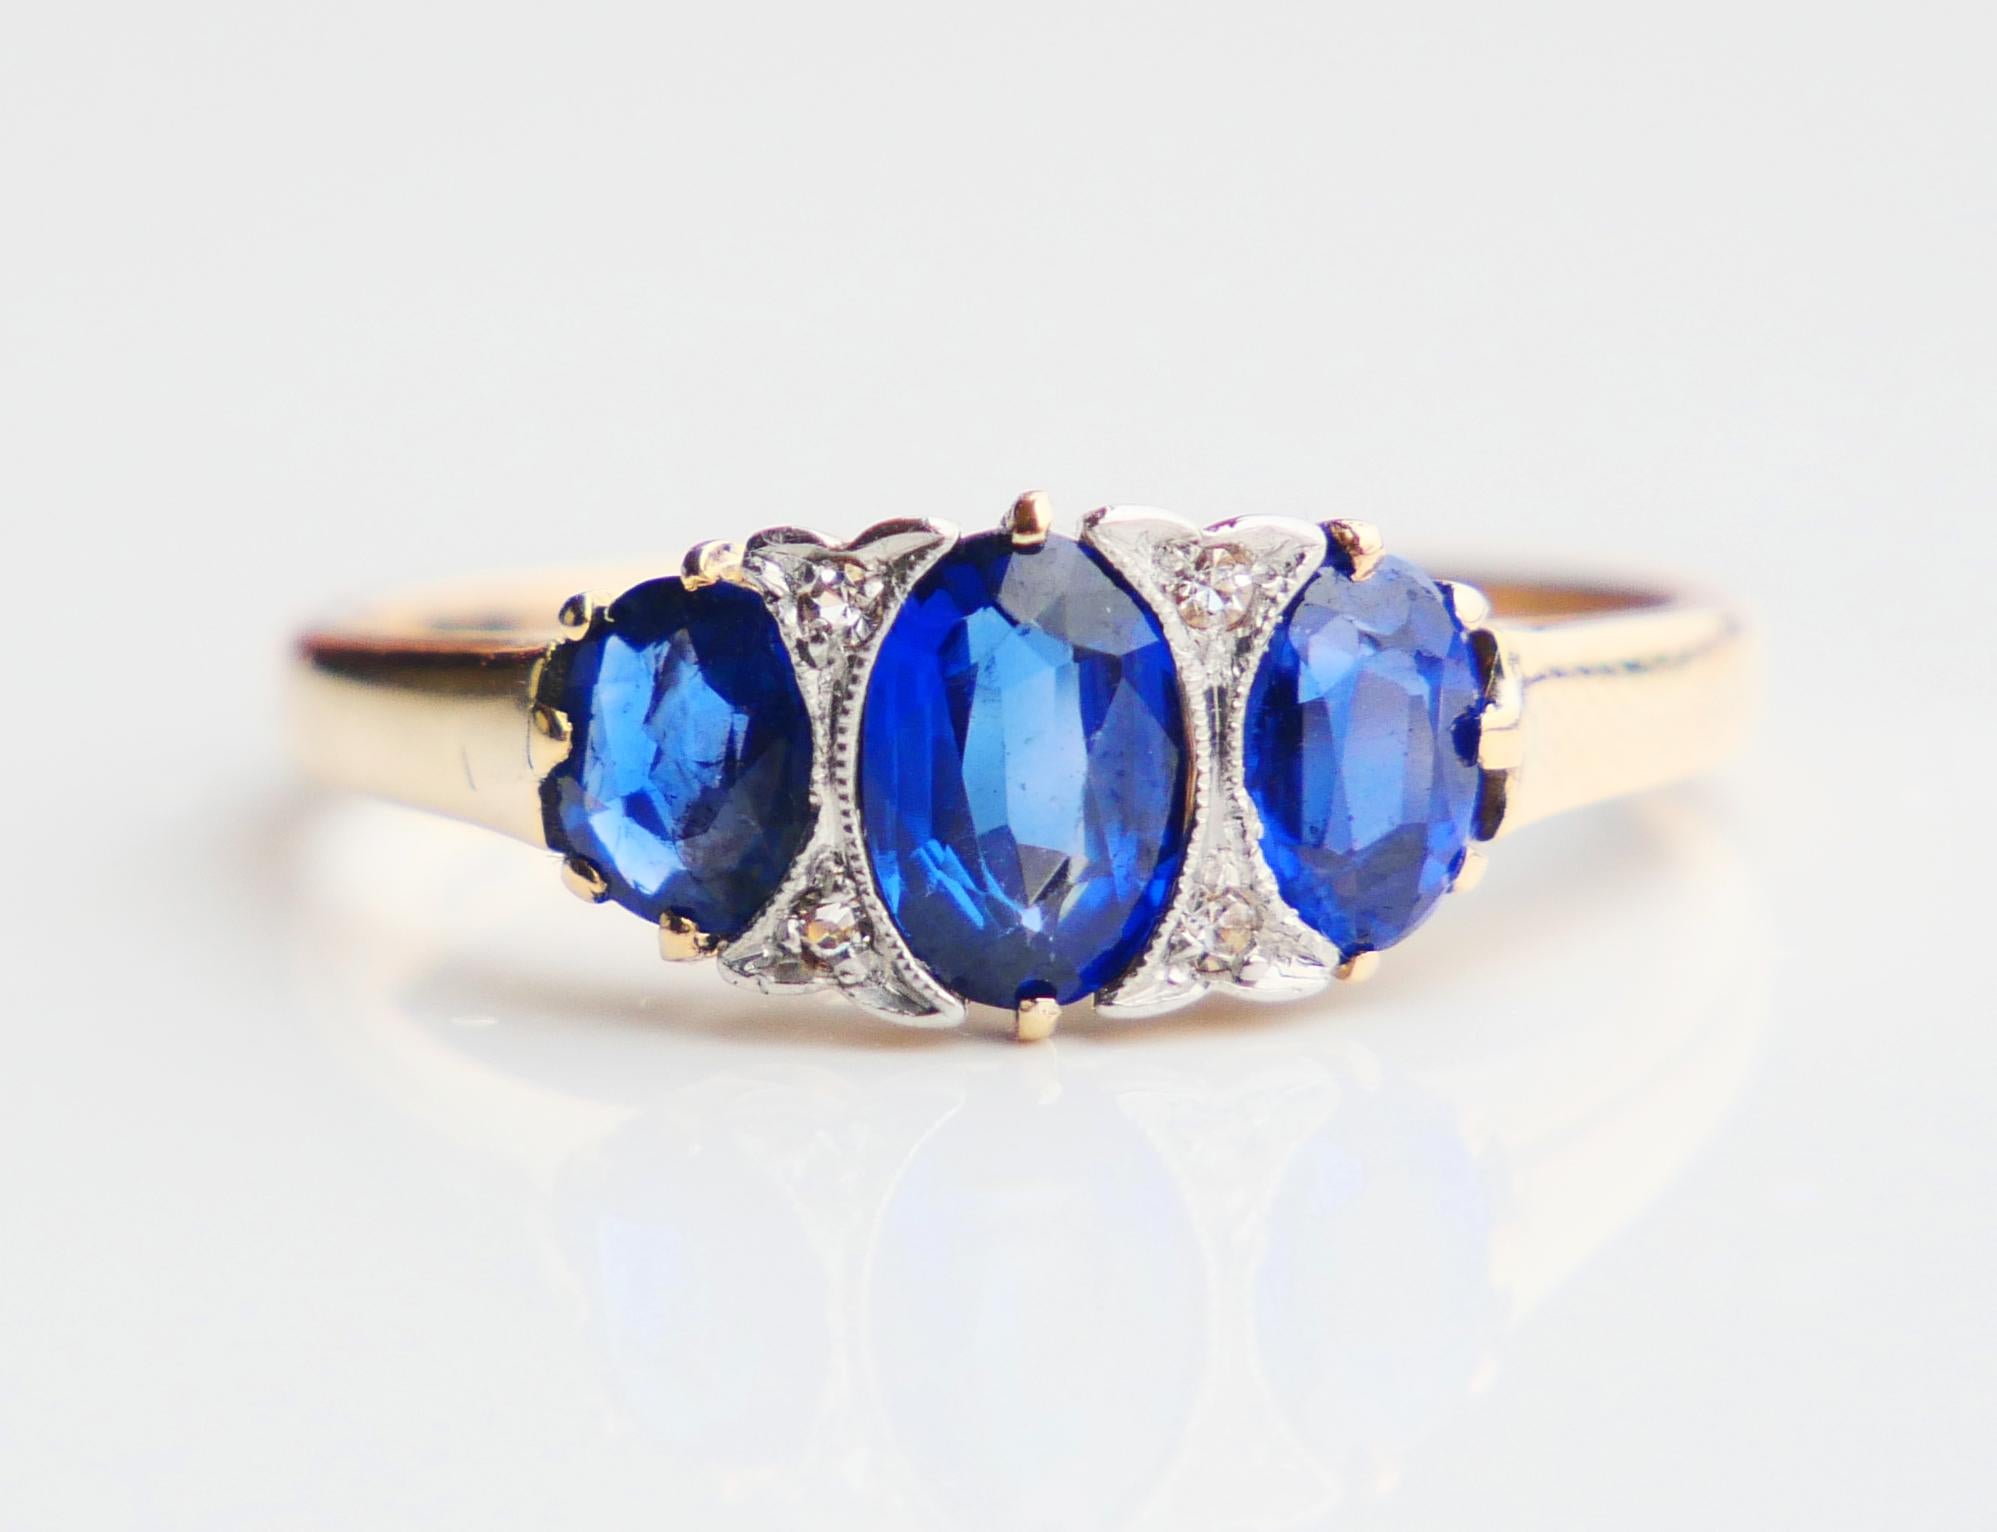 Ring in solid 14K Yellow Gold decorated with three medium Blue Sapphires and 4 old diamonds cut Diamonds in Platinum clusters.

Crown with stones measures 13 mm x 7 mm x 4 mm deep

Sapphires are lab made, largest sapphire in the center 6.25 mm x